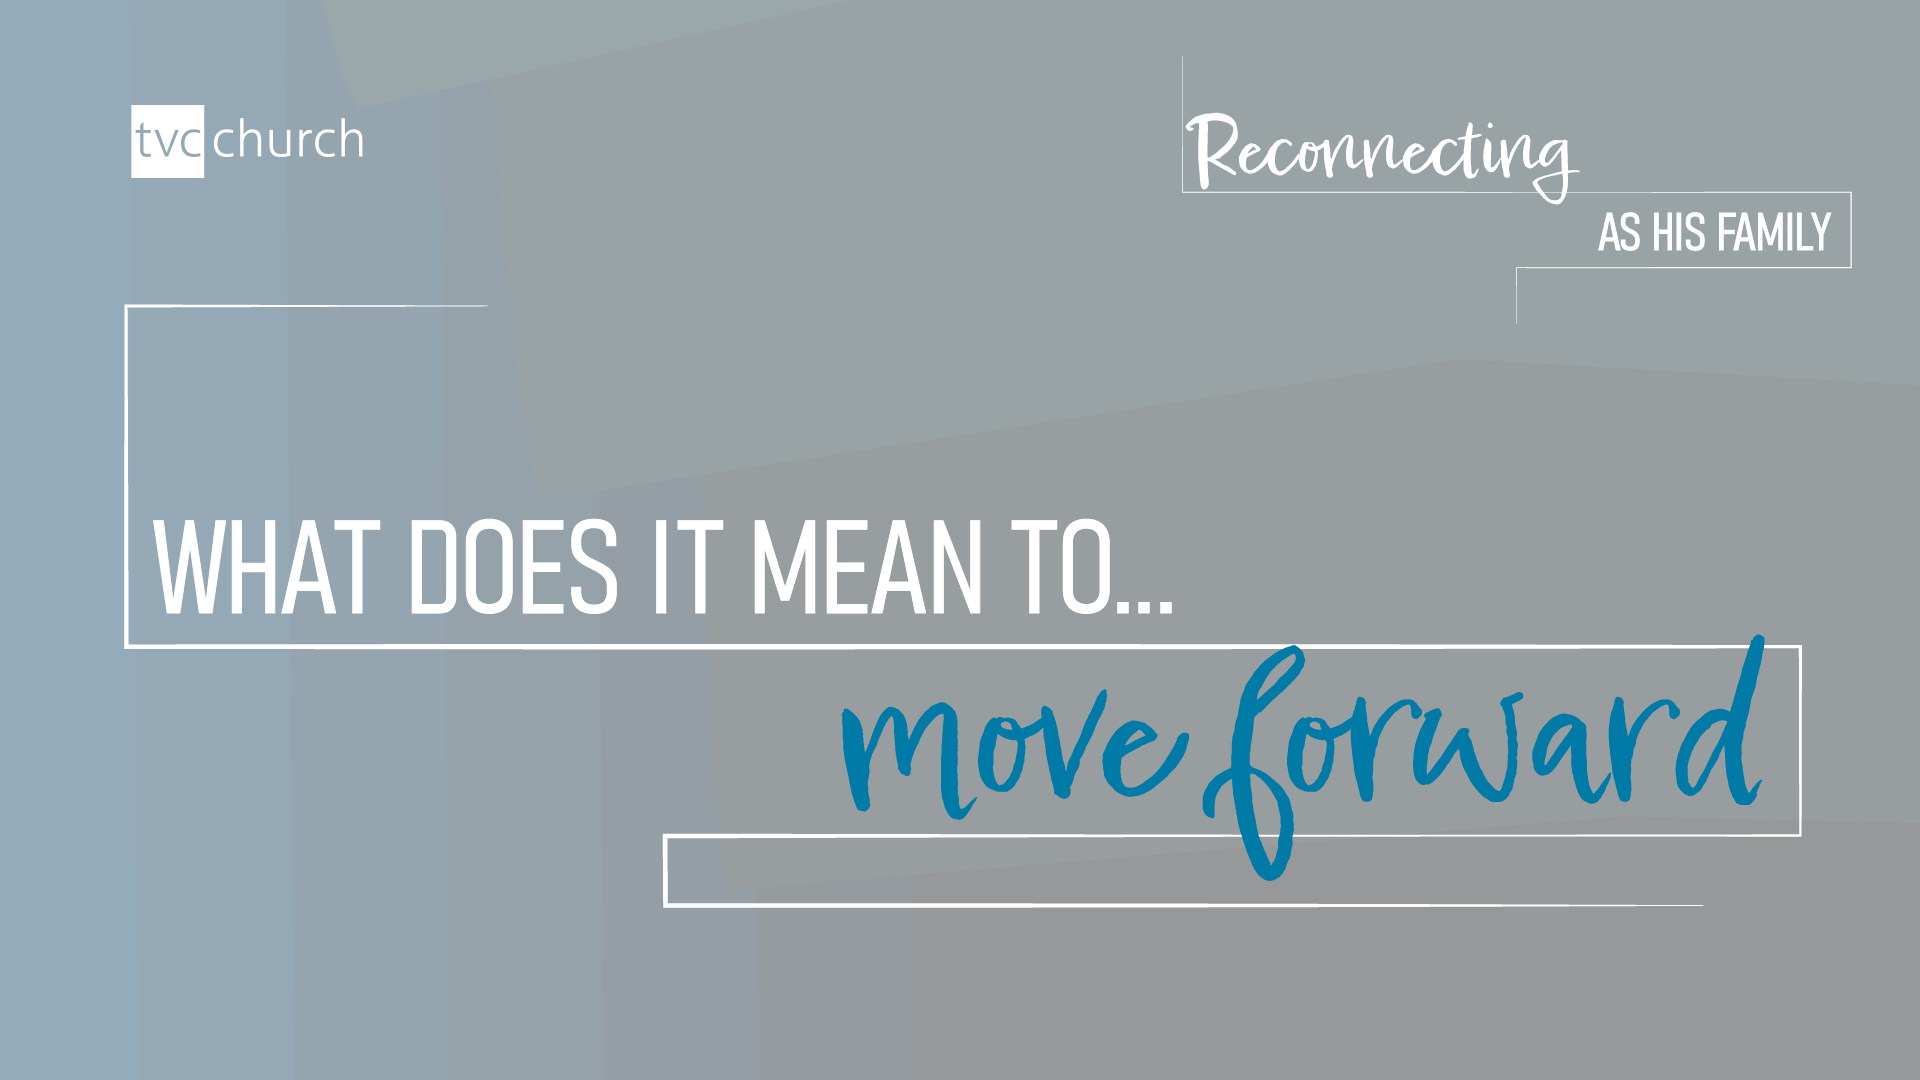 What does it mean to move forward?